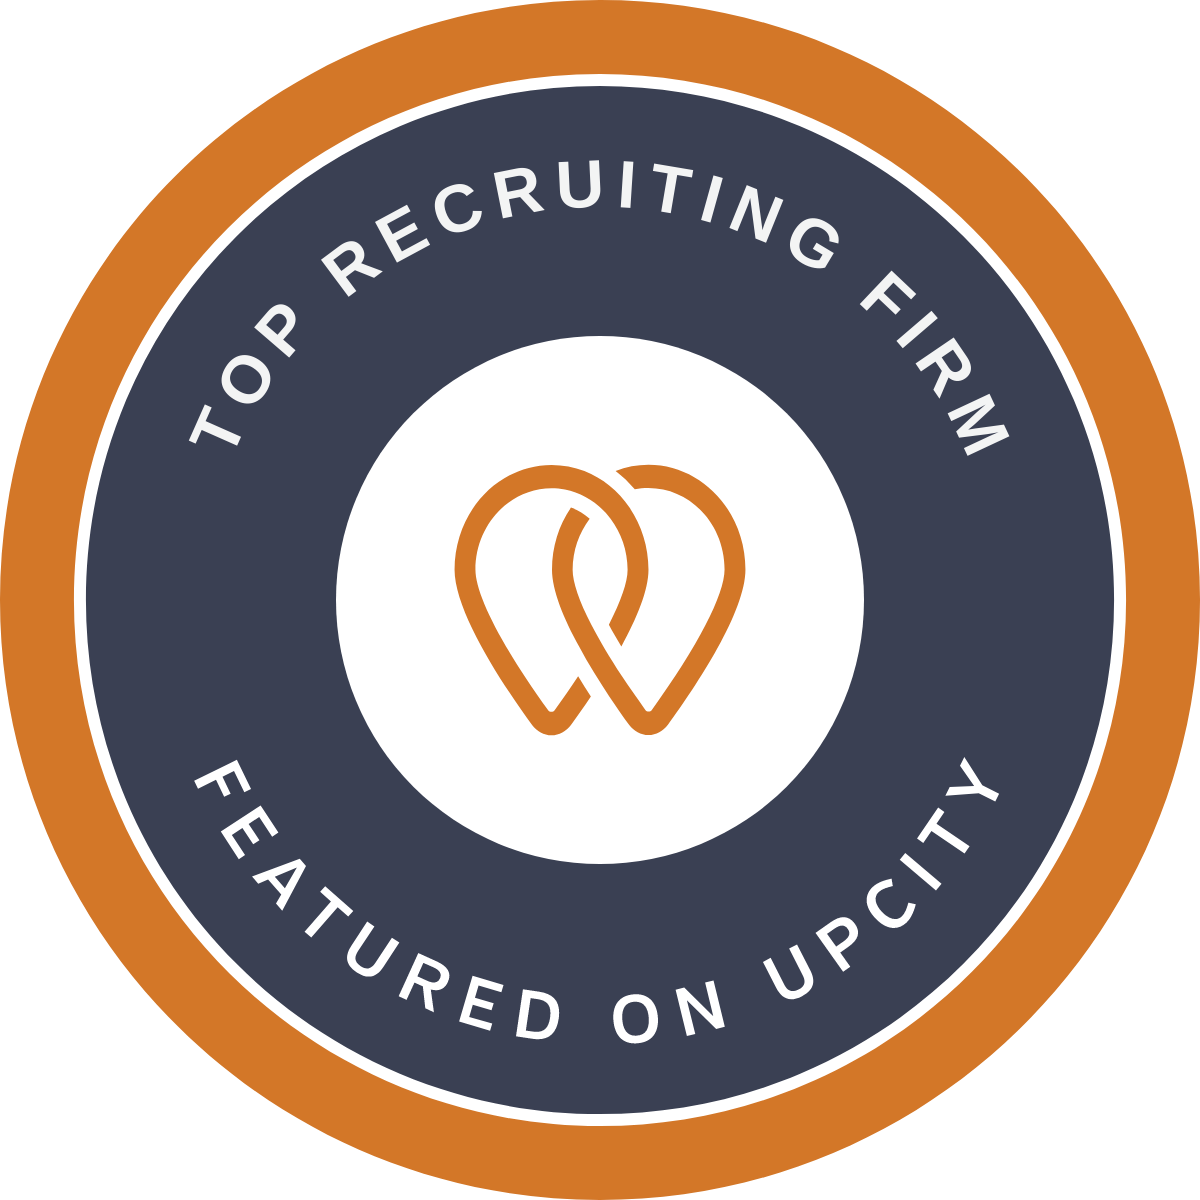 Top recruiting firm featured on Upcity